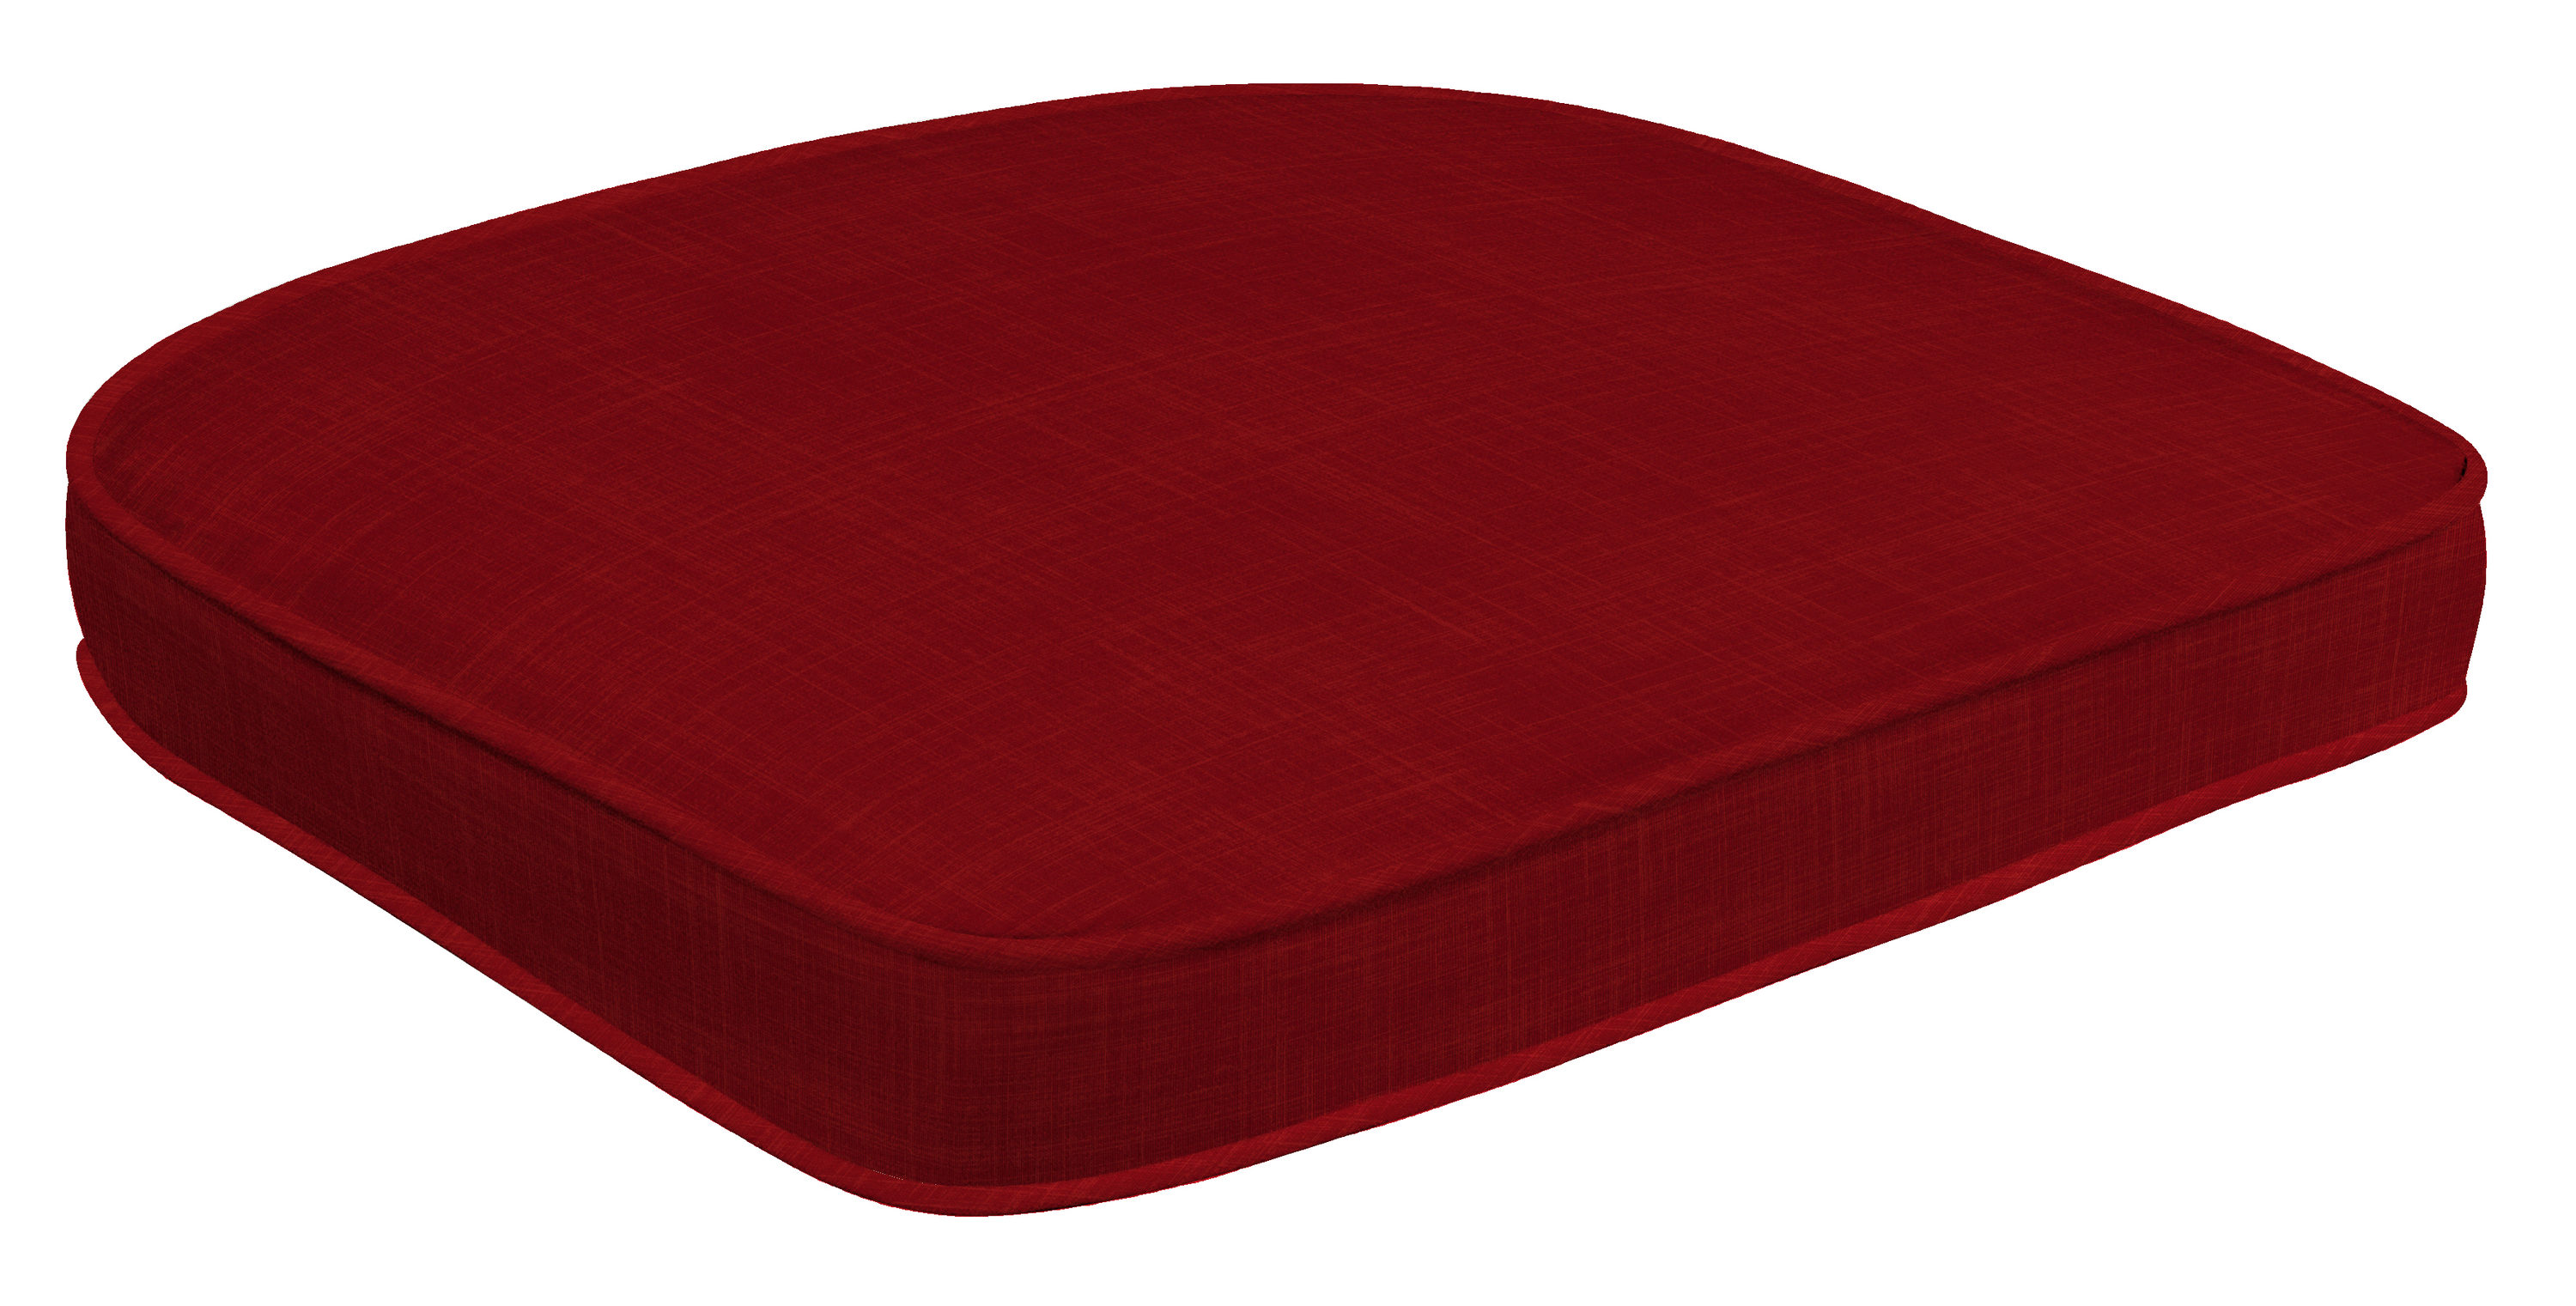 Style Selections Valleydale 21-in x 18.5-in Red Seat Pad at Lowes.com